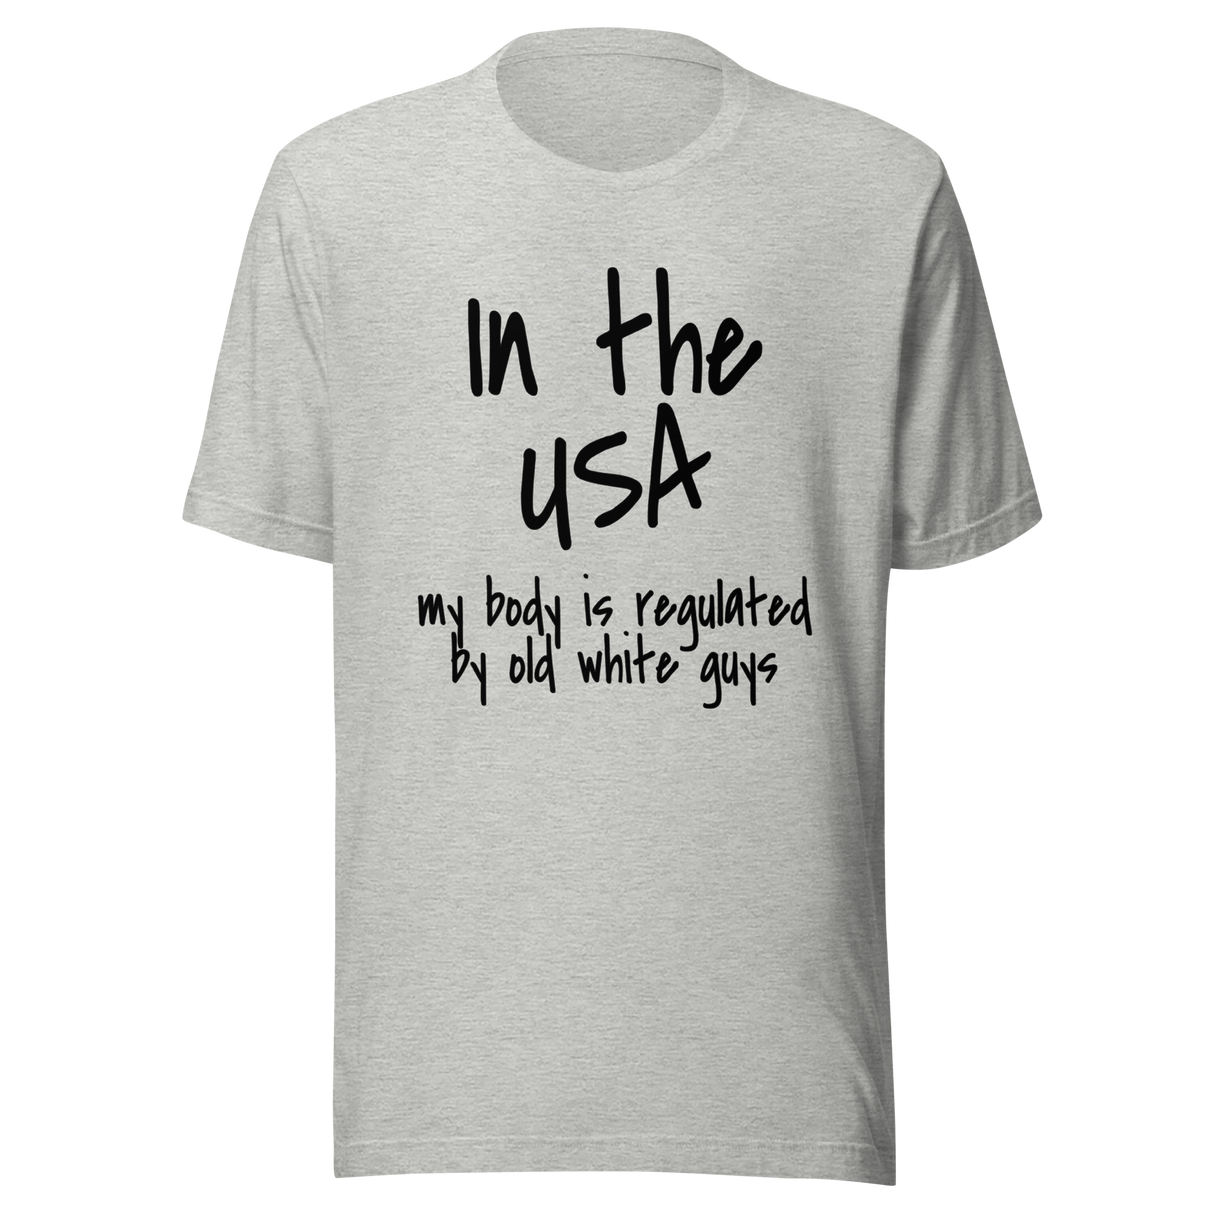 Products In The USA My Body Is Regulated By Old White Guys - USA Tee - Body T-Shirt - Regulated Tee - T-Shirt - Tee#color_athletic-heather